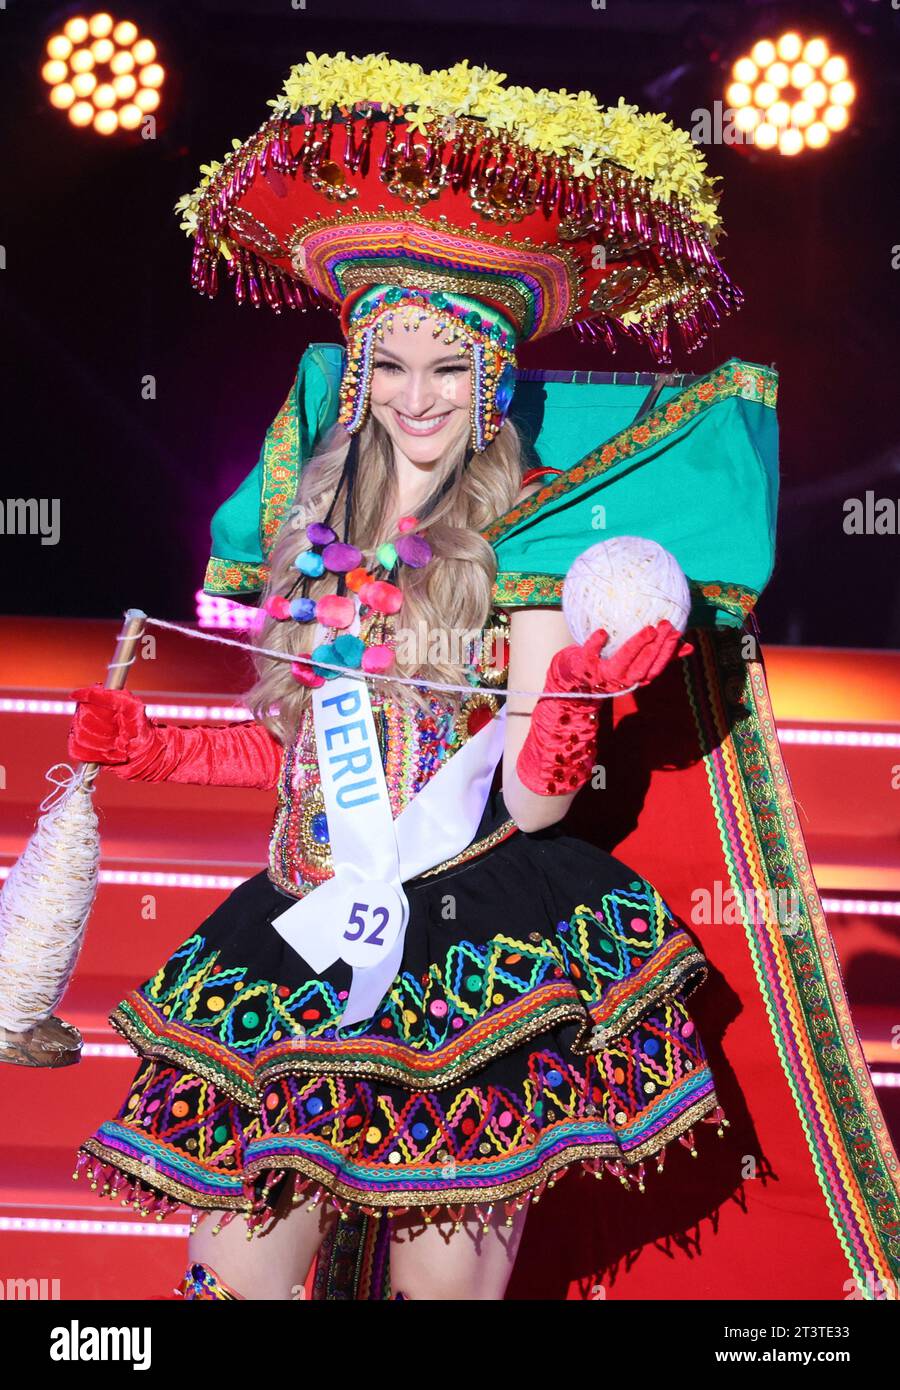 Tokyo, Japan. 26th Oct, 2023. Miss Peru Camilia Diaz Daneri in national costume poses at the 61st Miss International beauty pageant in Tokyo on Thursday, October 26, 2023. 70 contestants participaed the annual beauty contests and Camilia Diaz Daneri won the 2nd runner-up of the Miss International 2023. (photo by Yoshio Tsunoda/AFLO) Stock Photo